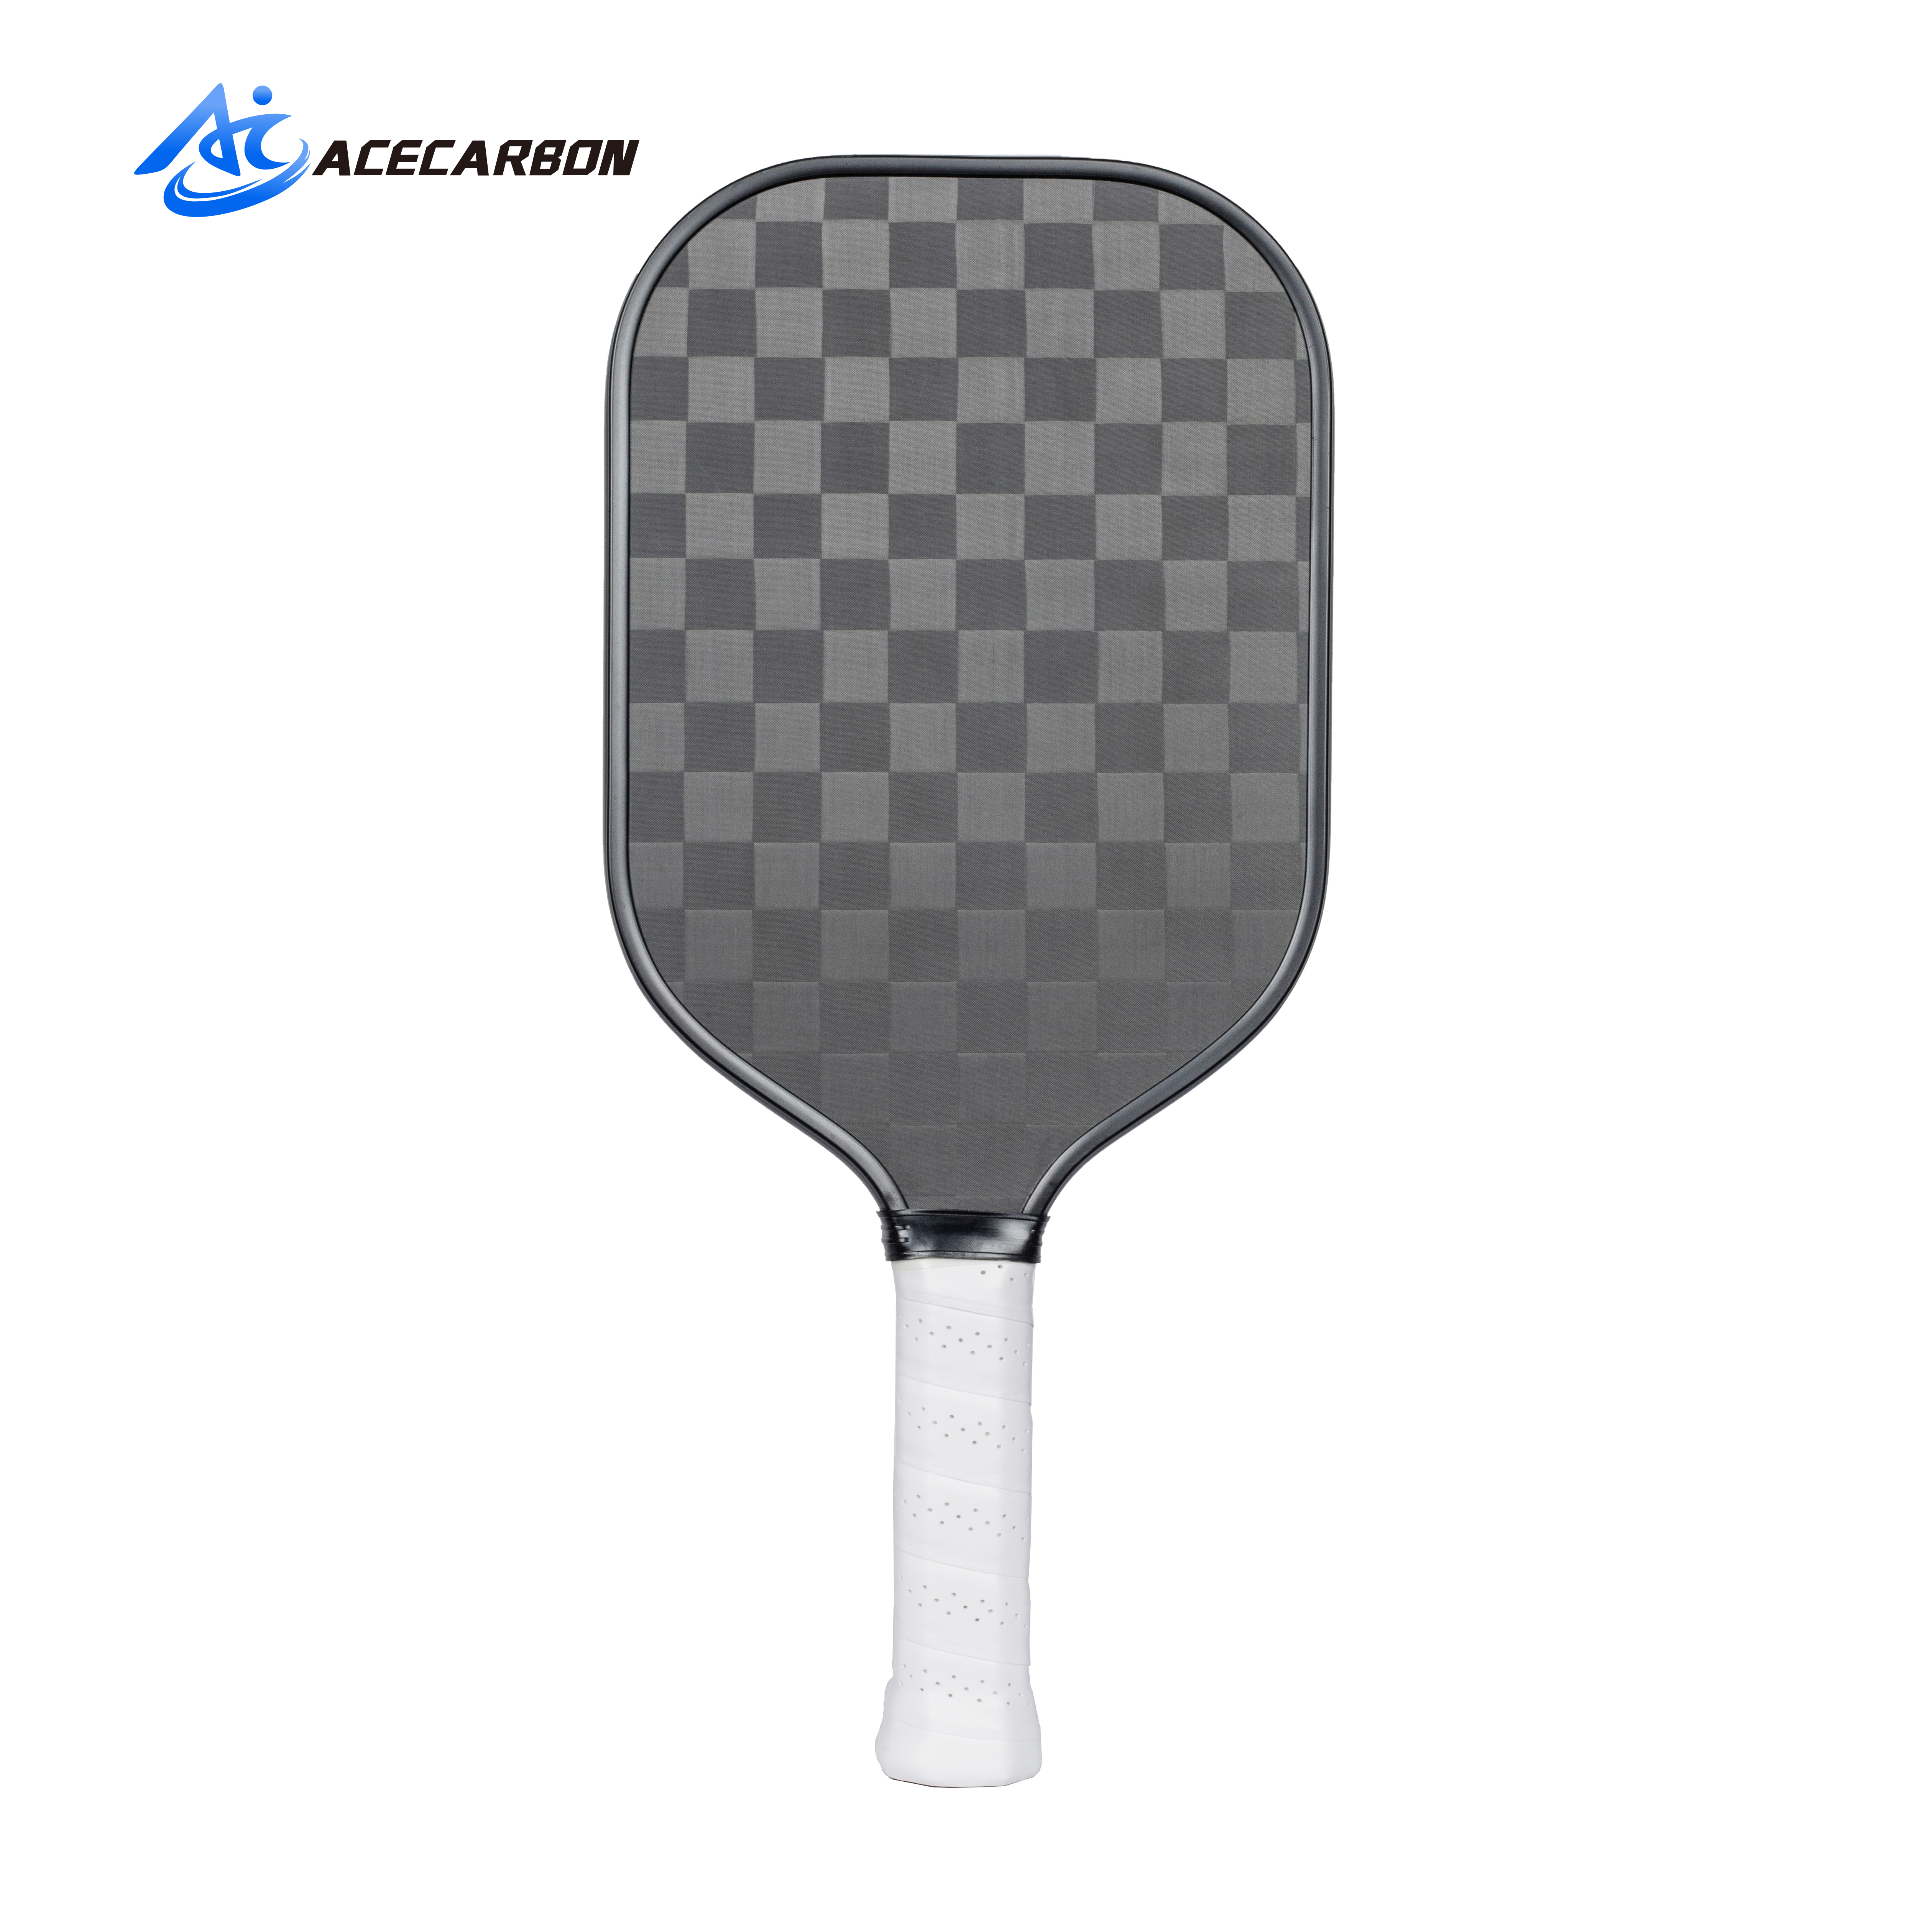 ACECARBON's Pickleball Rackets: Precision and Power Unleashed